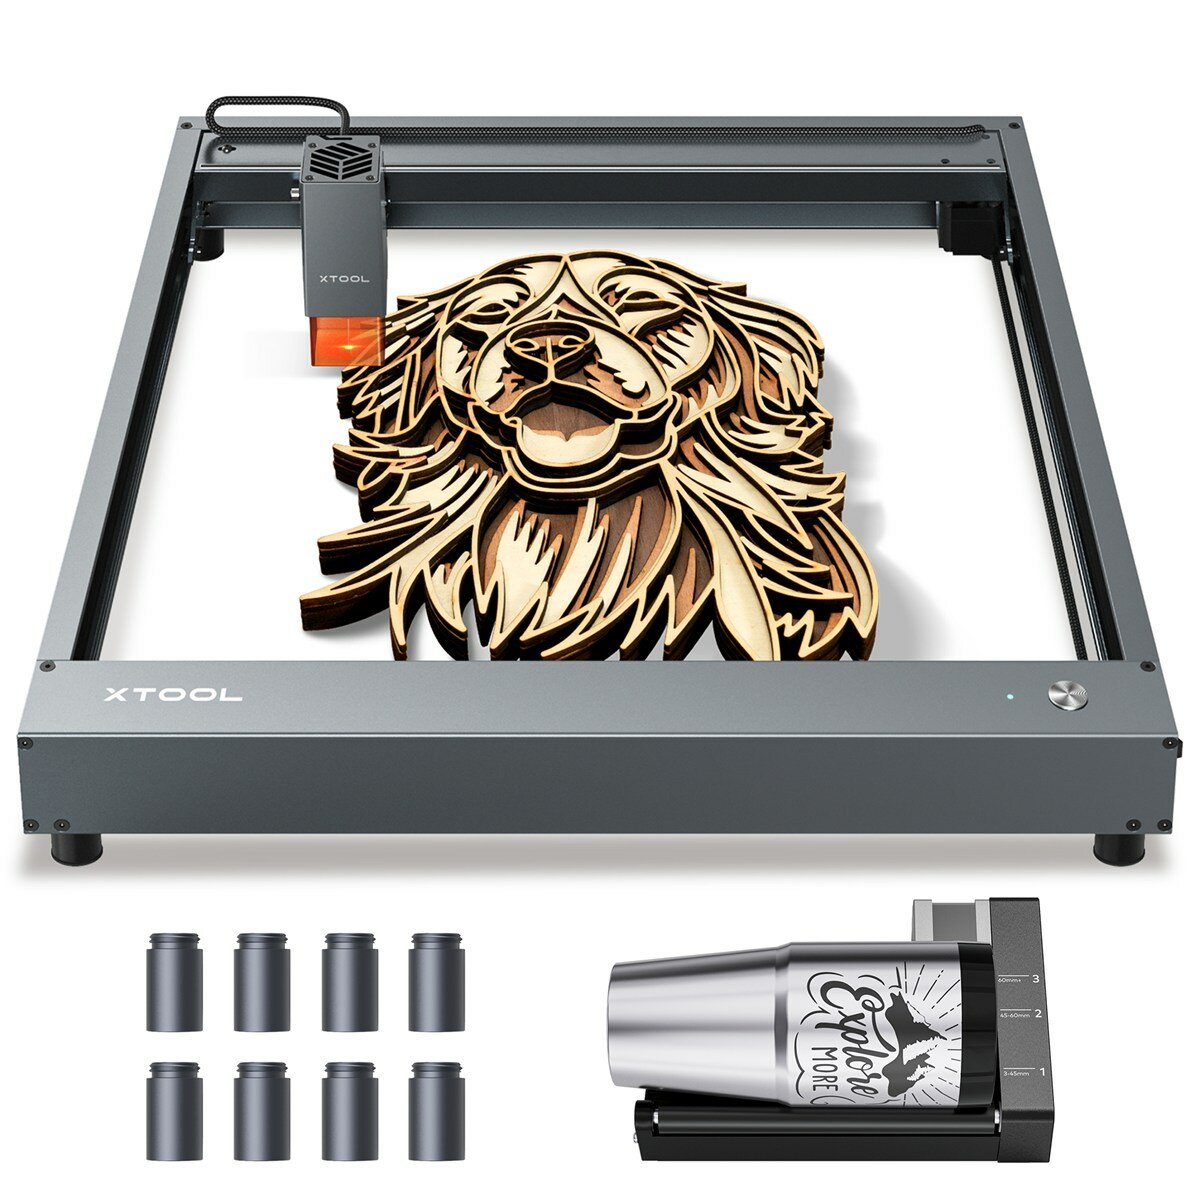 Makeblock xTool D1 Laser Engraving Machine With Rotary Attachment and Raiser DIY CNC Laser Cutter Engraver 10W Dual Lase